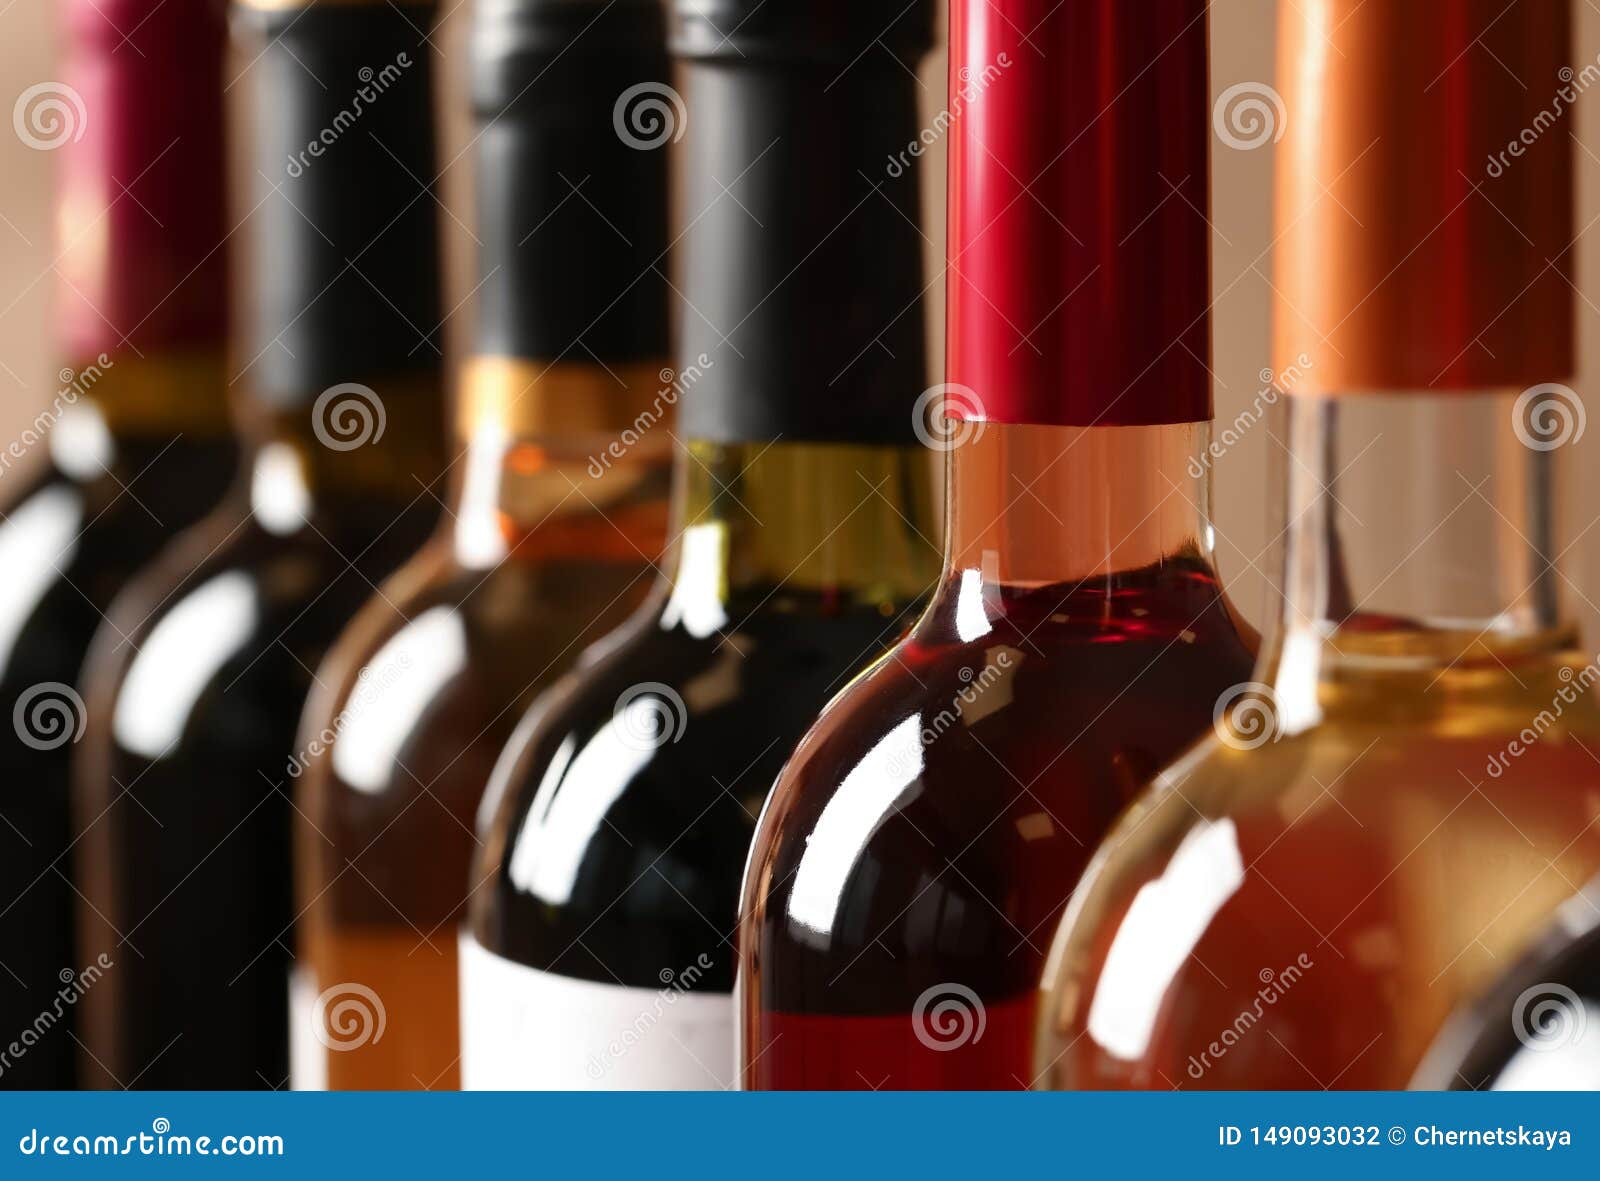 bottles of different wines. expensive collection